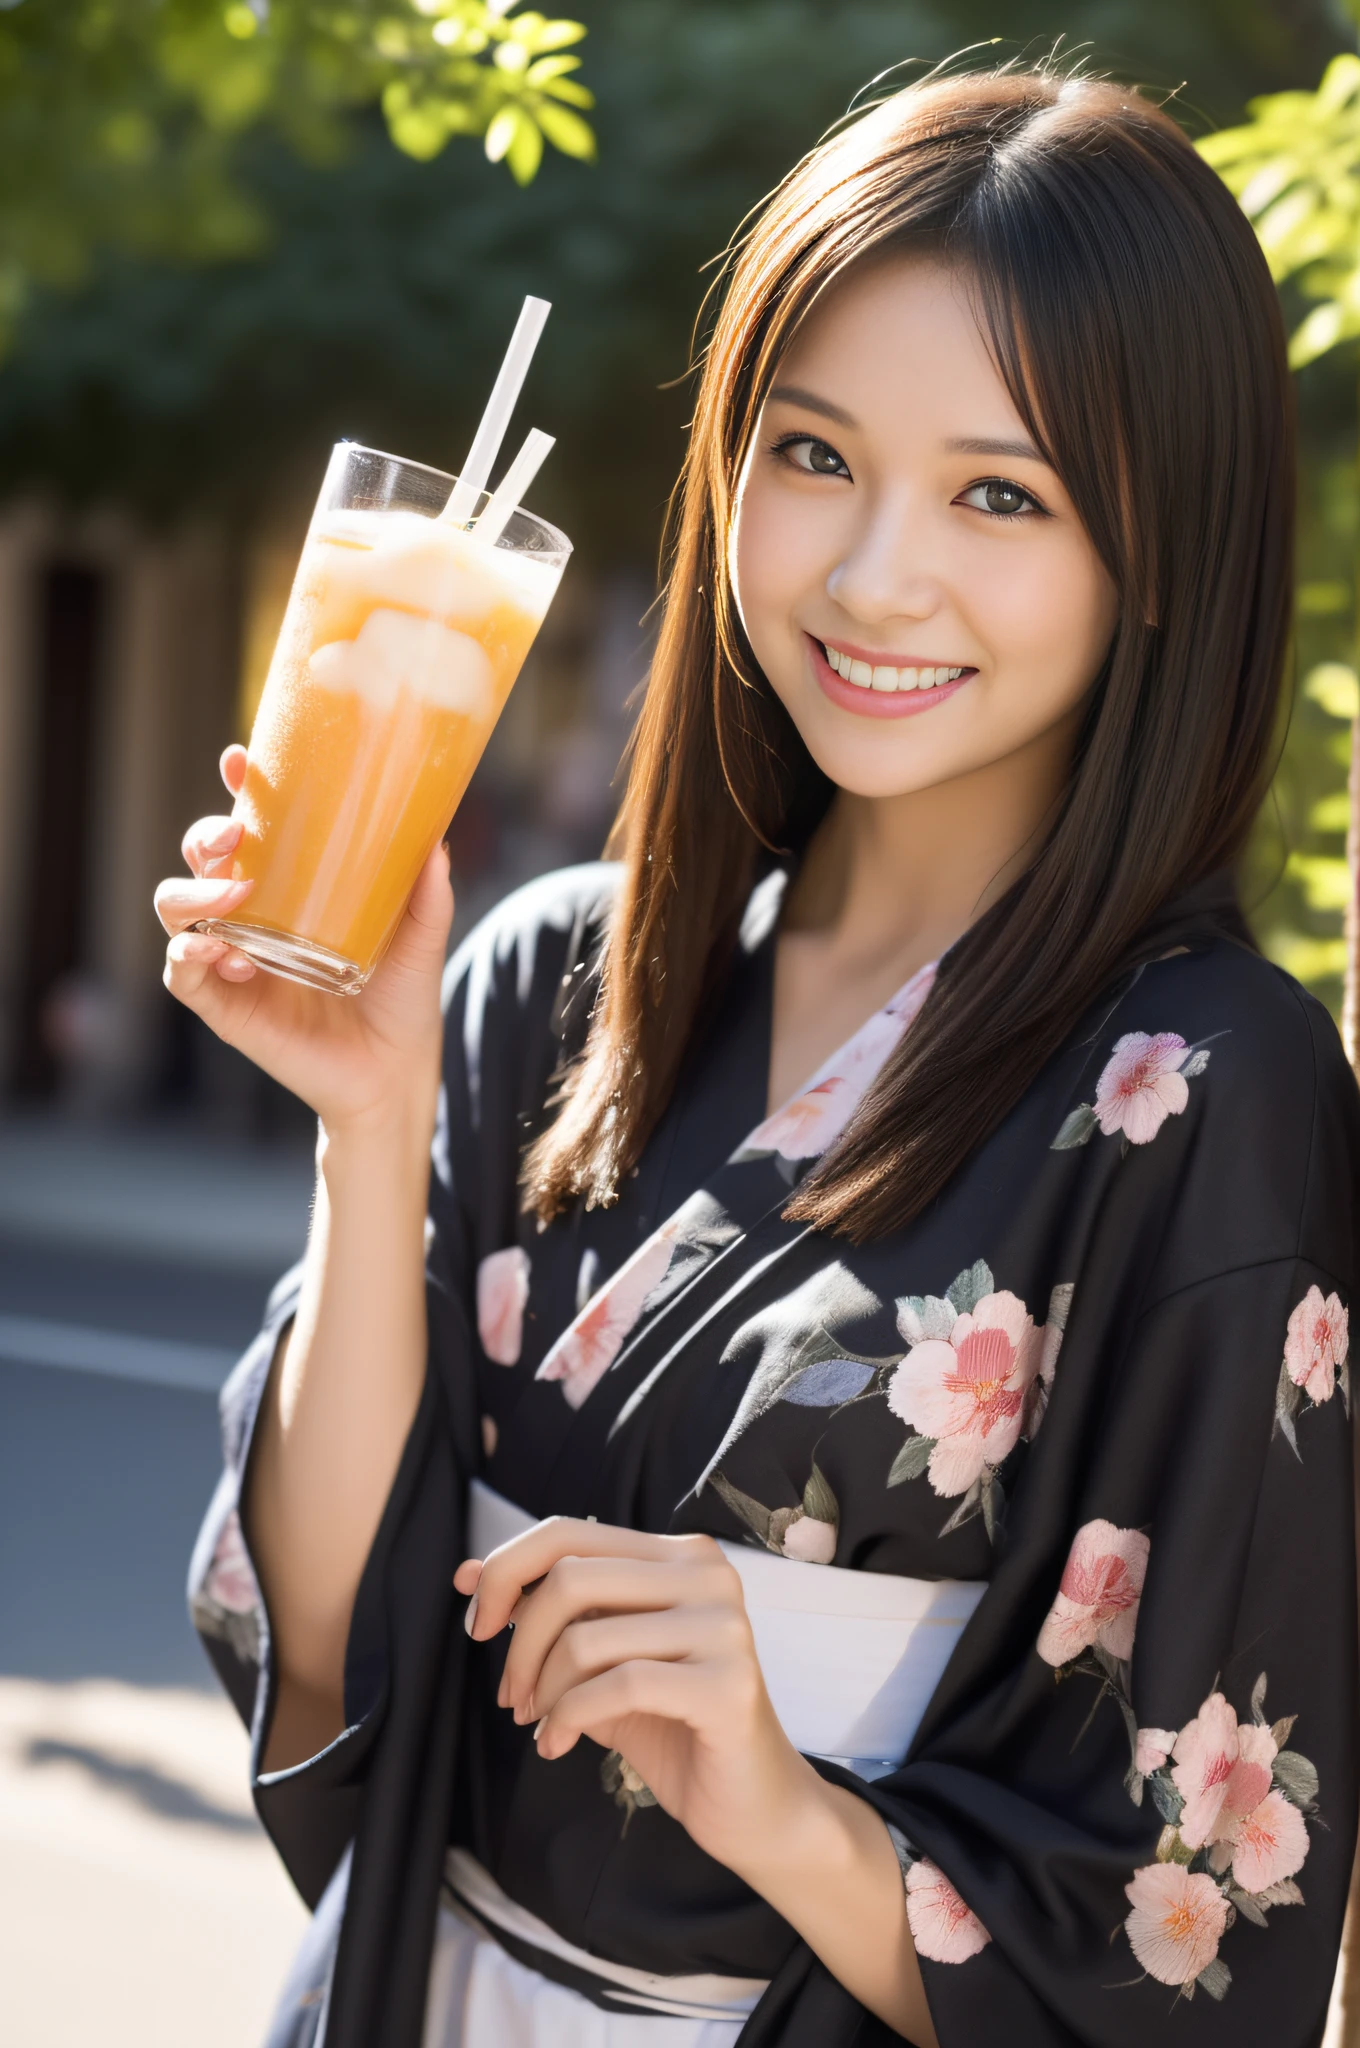 ((beste-Qualit))、((The ultra -The high-definition))finely detail、(((Beautiful One Girl)))、very detailed eyes and faces、Yukata with a light floral pattern、In the street、Drink juice、A slight smile、a park